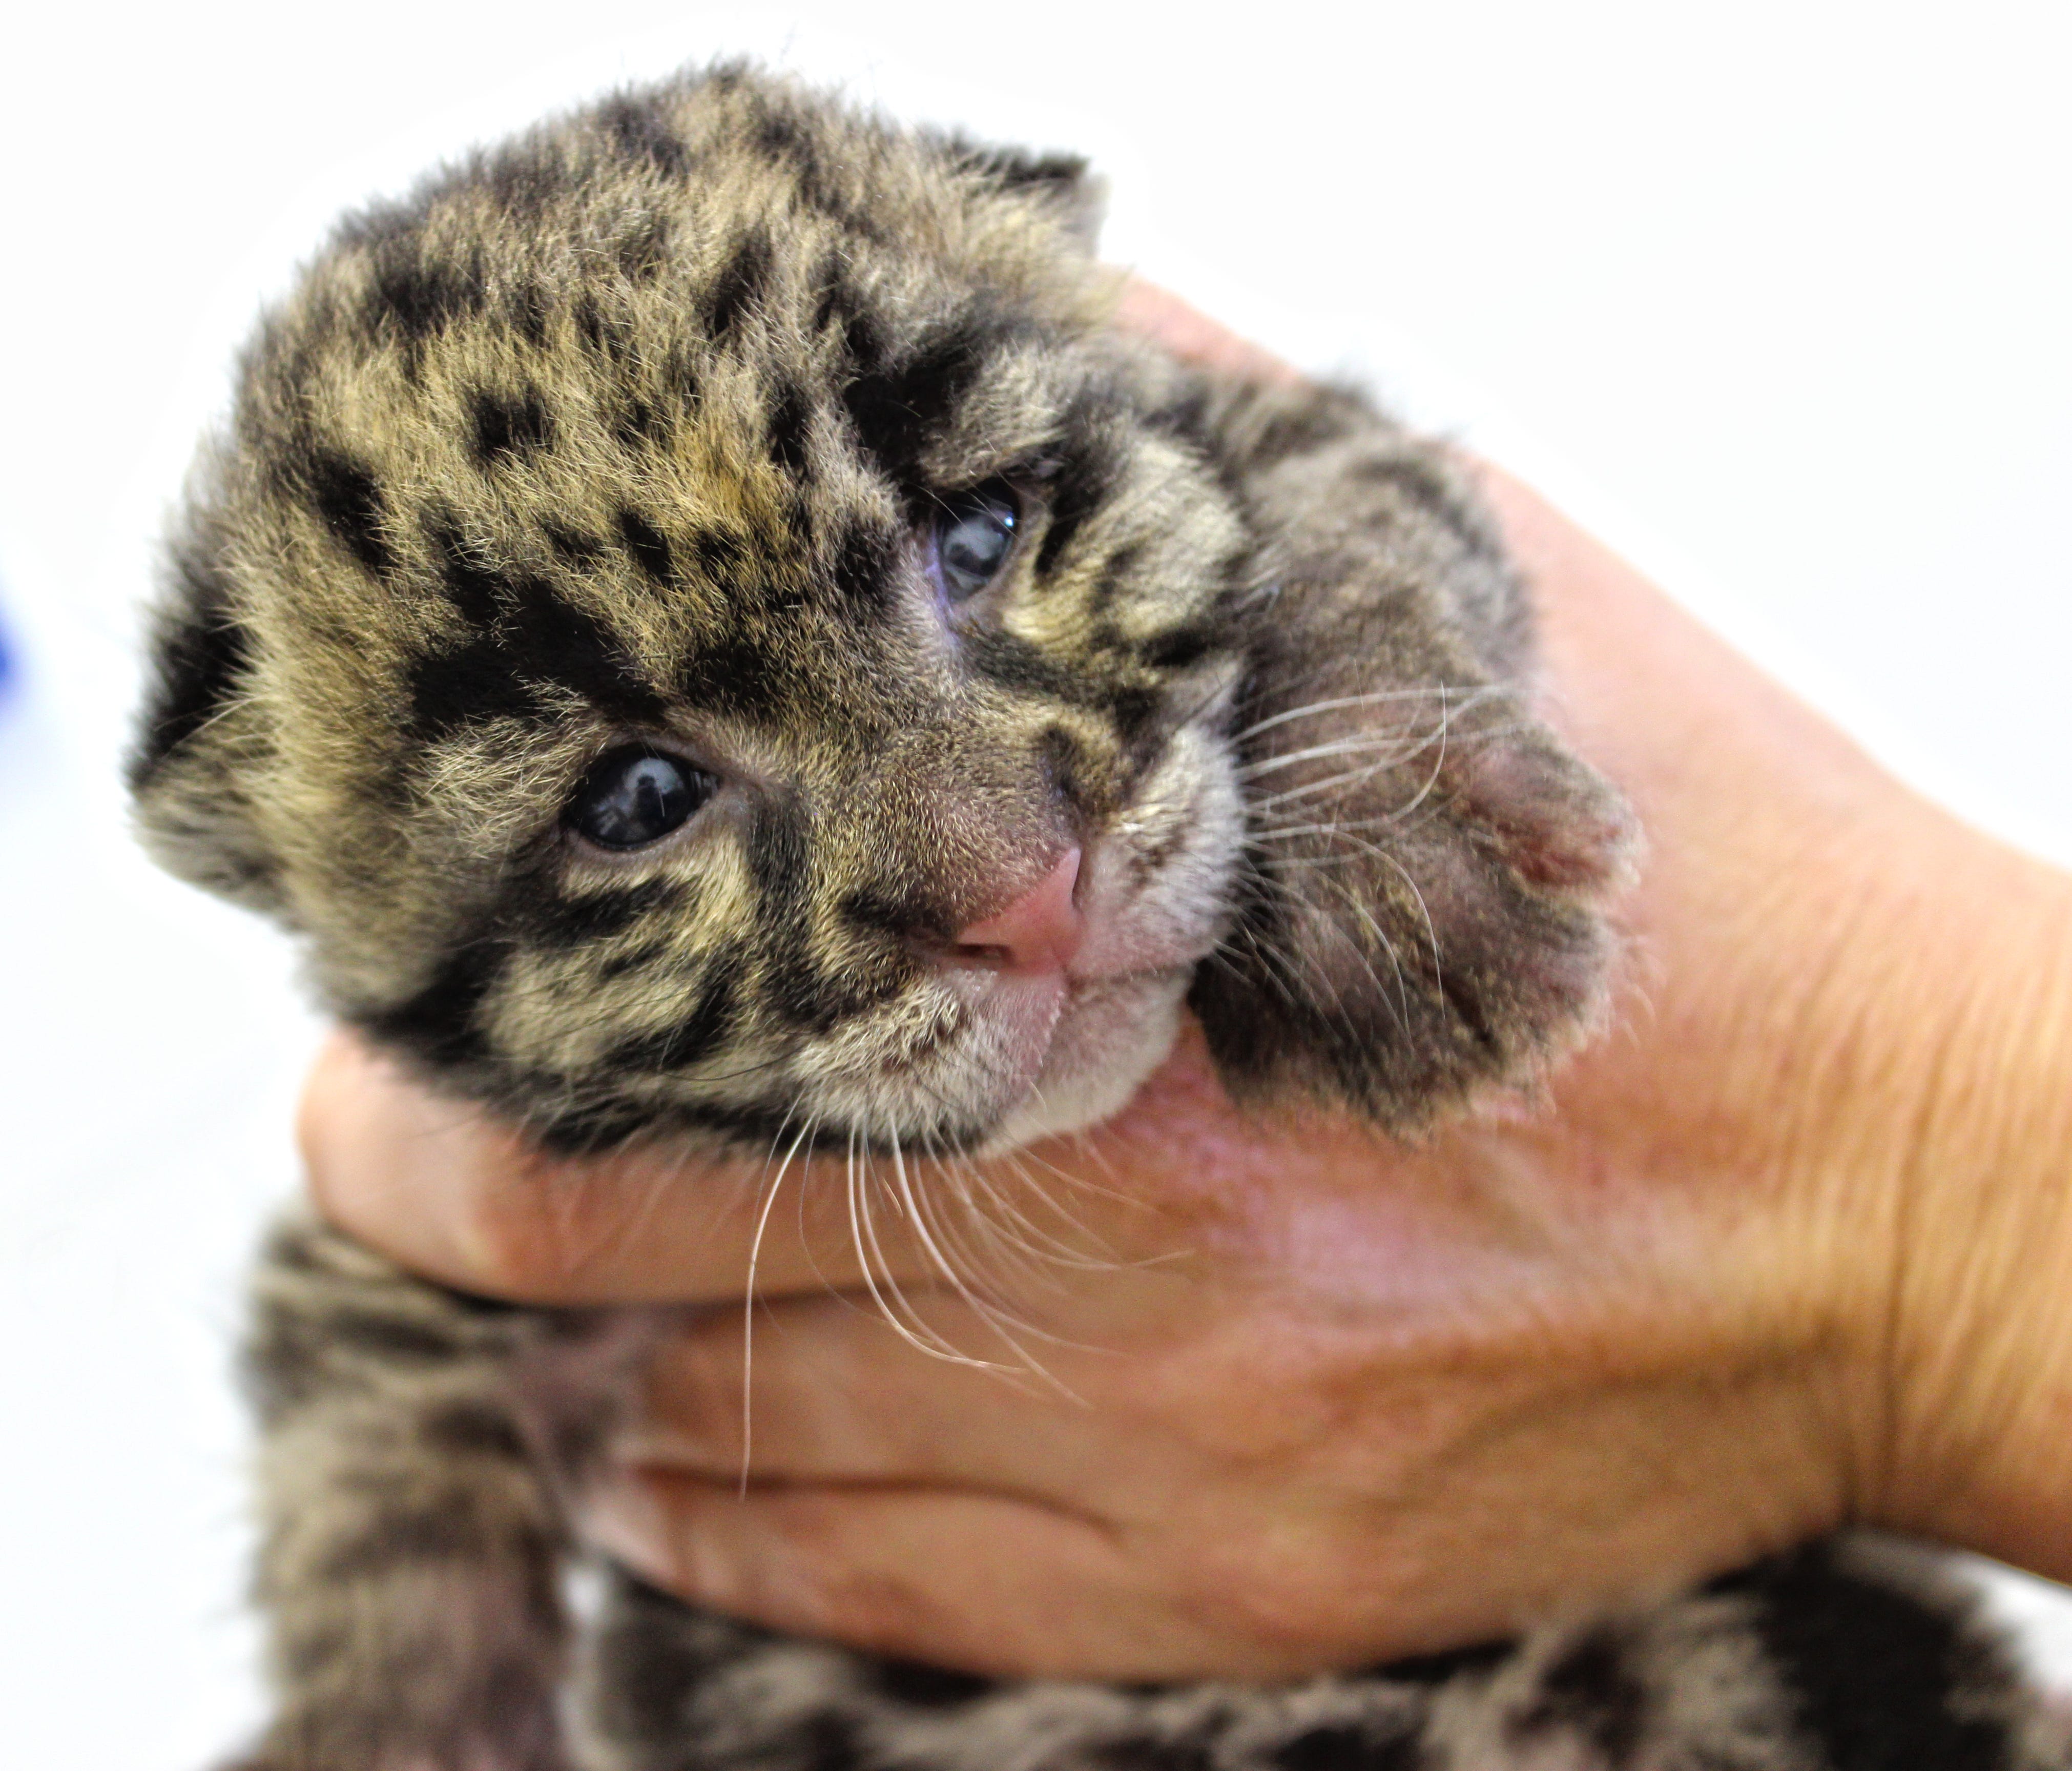 This Clouded Leopard cub was born March 4 and can be seen in the nursery window at the Tanganyika Wildlife Park in Wichita, Kansas.